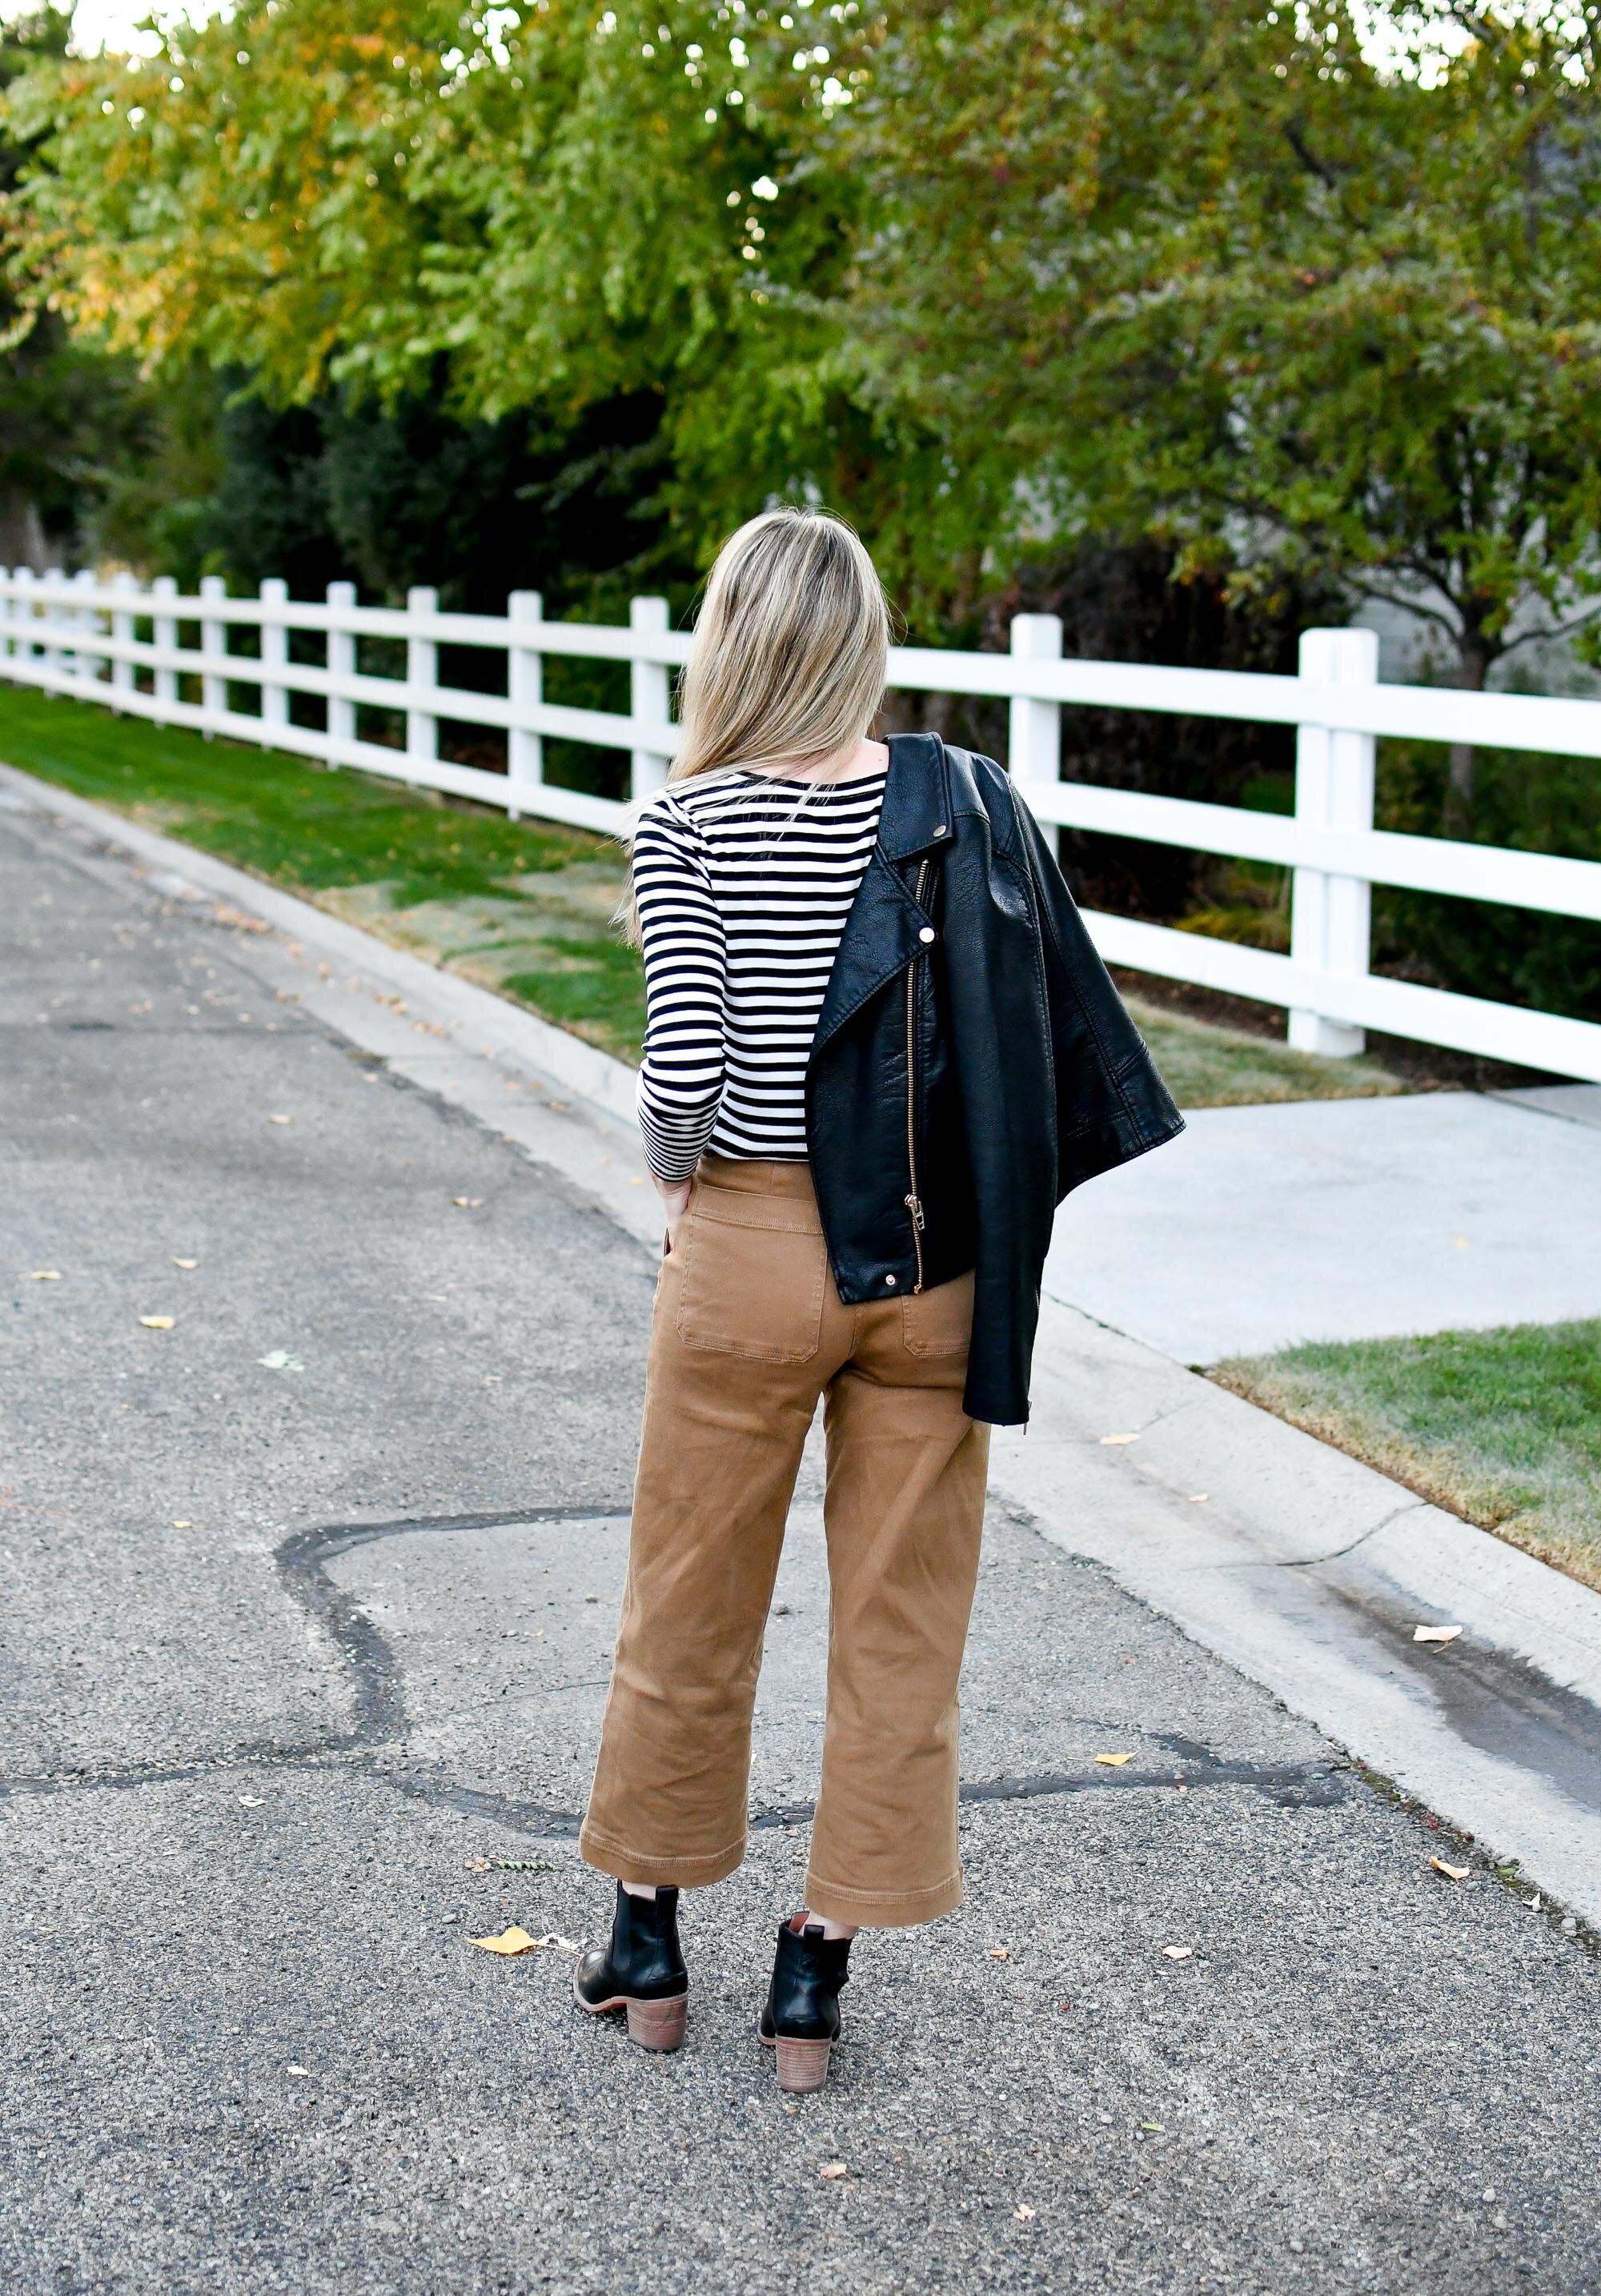 Dress like a calico cat / fall outfit — Cotton Cashmere Cat Hair